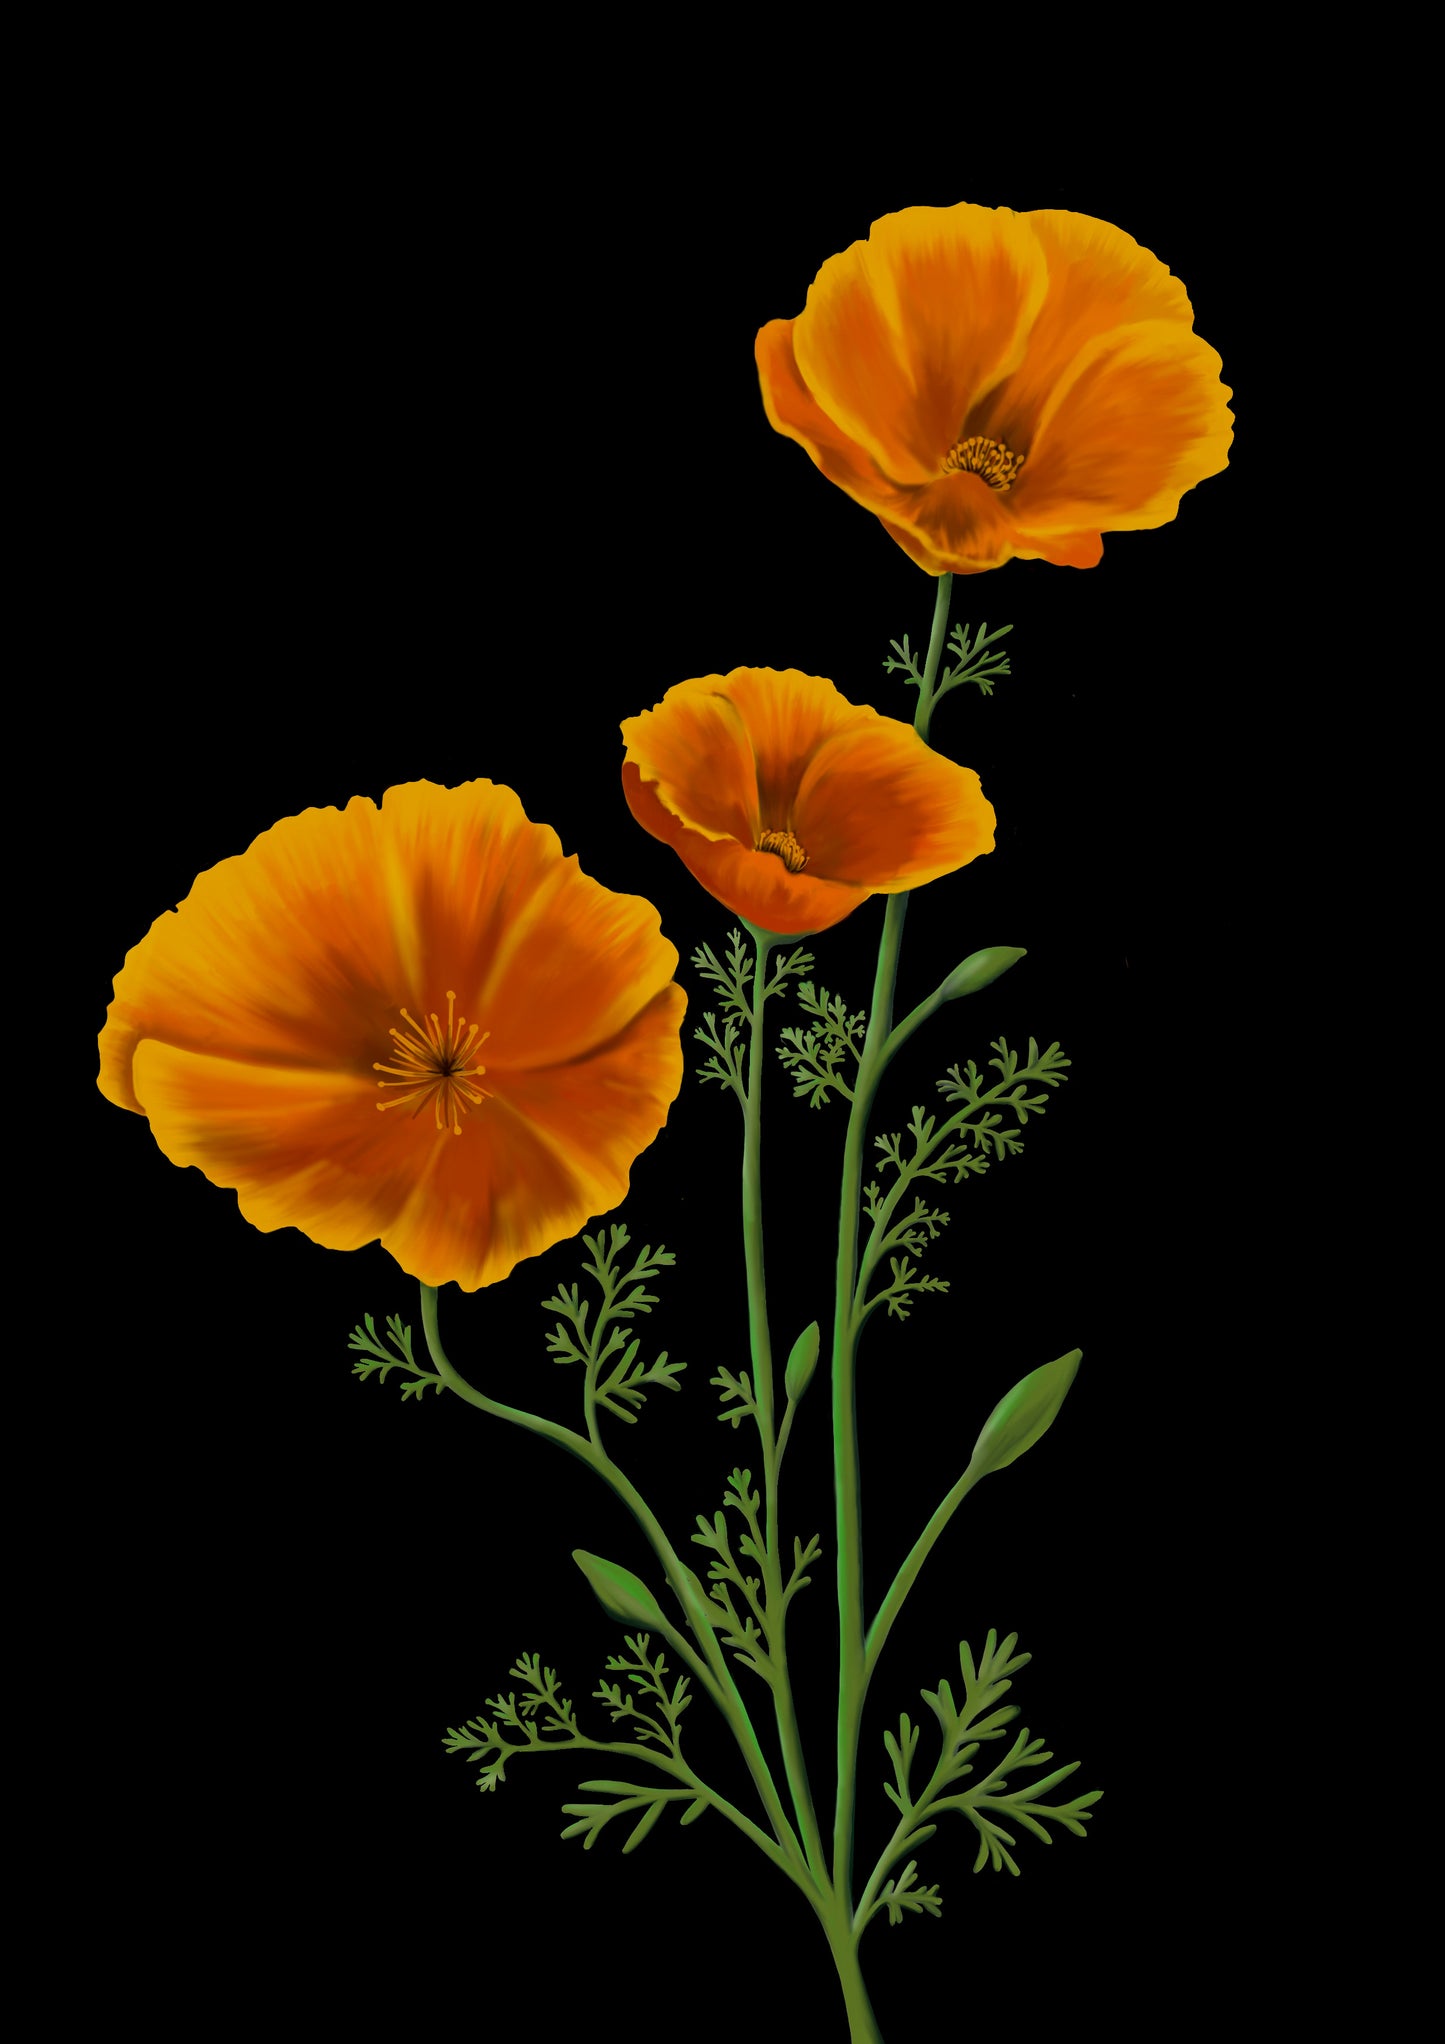 An illustrated art print of 3 orange california poppies on a black background